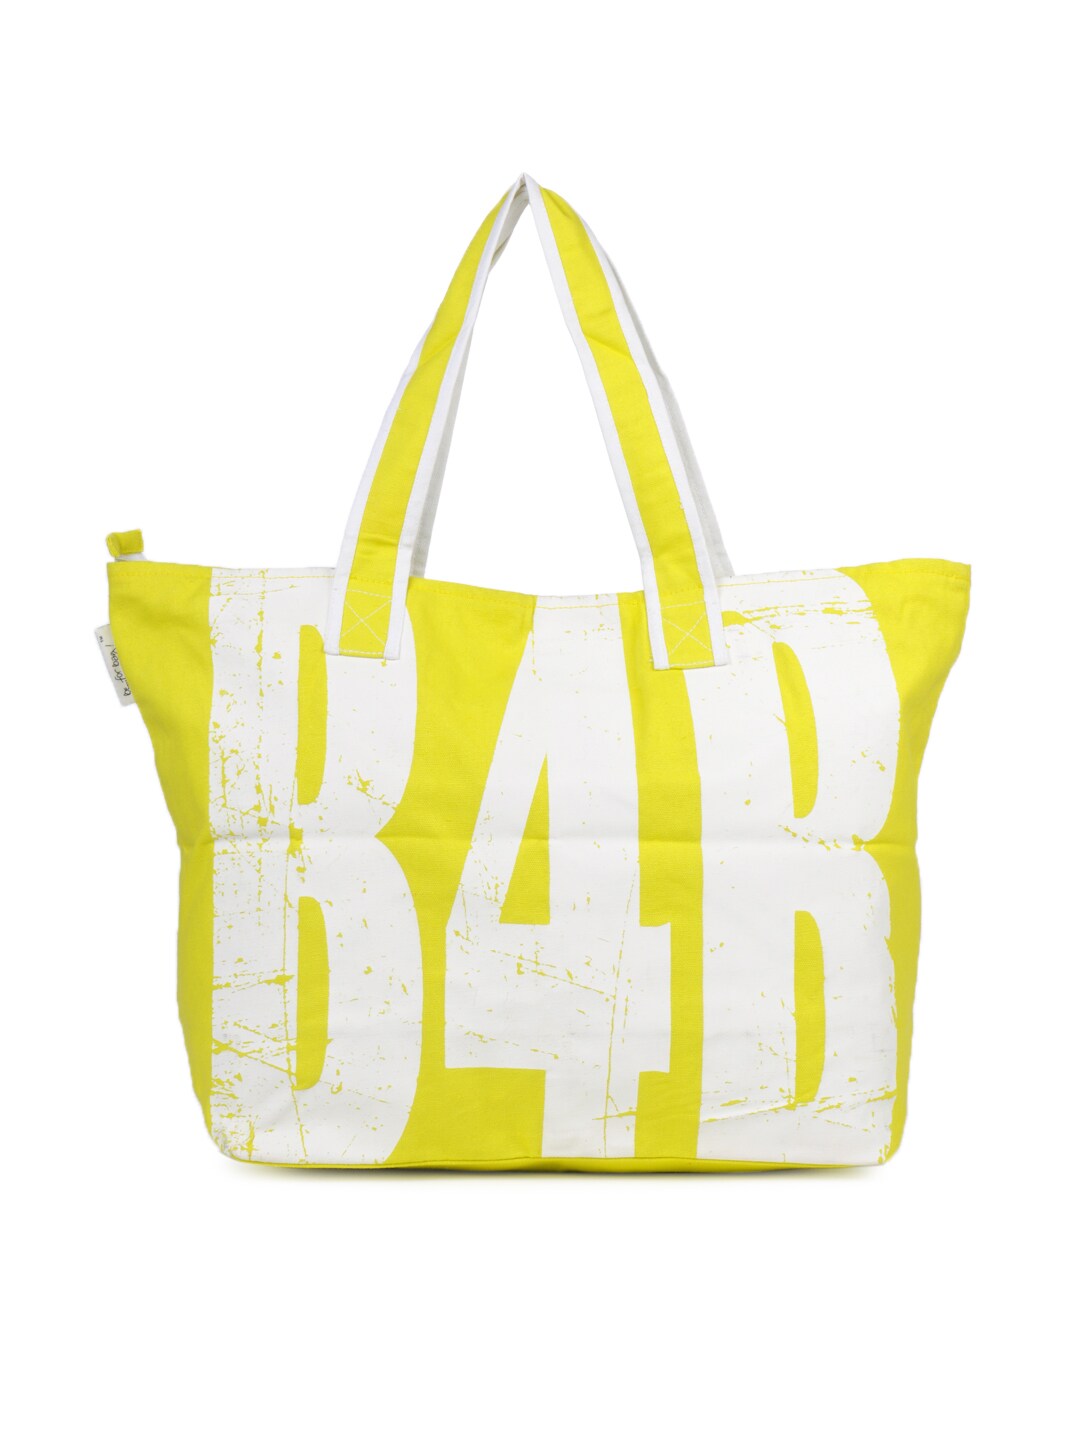 Be For Bag Women  Lime Green Tote Bag